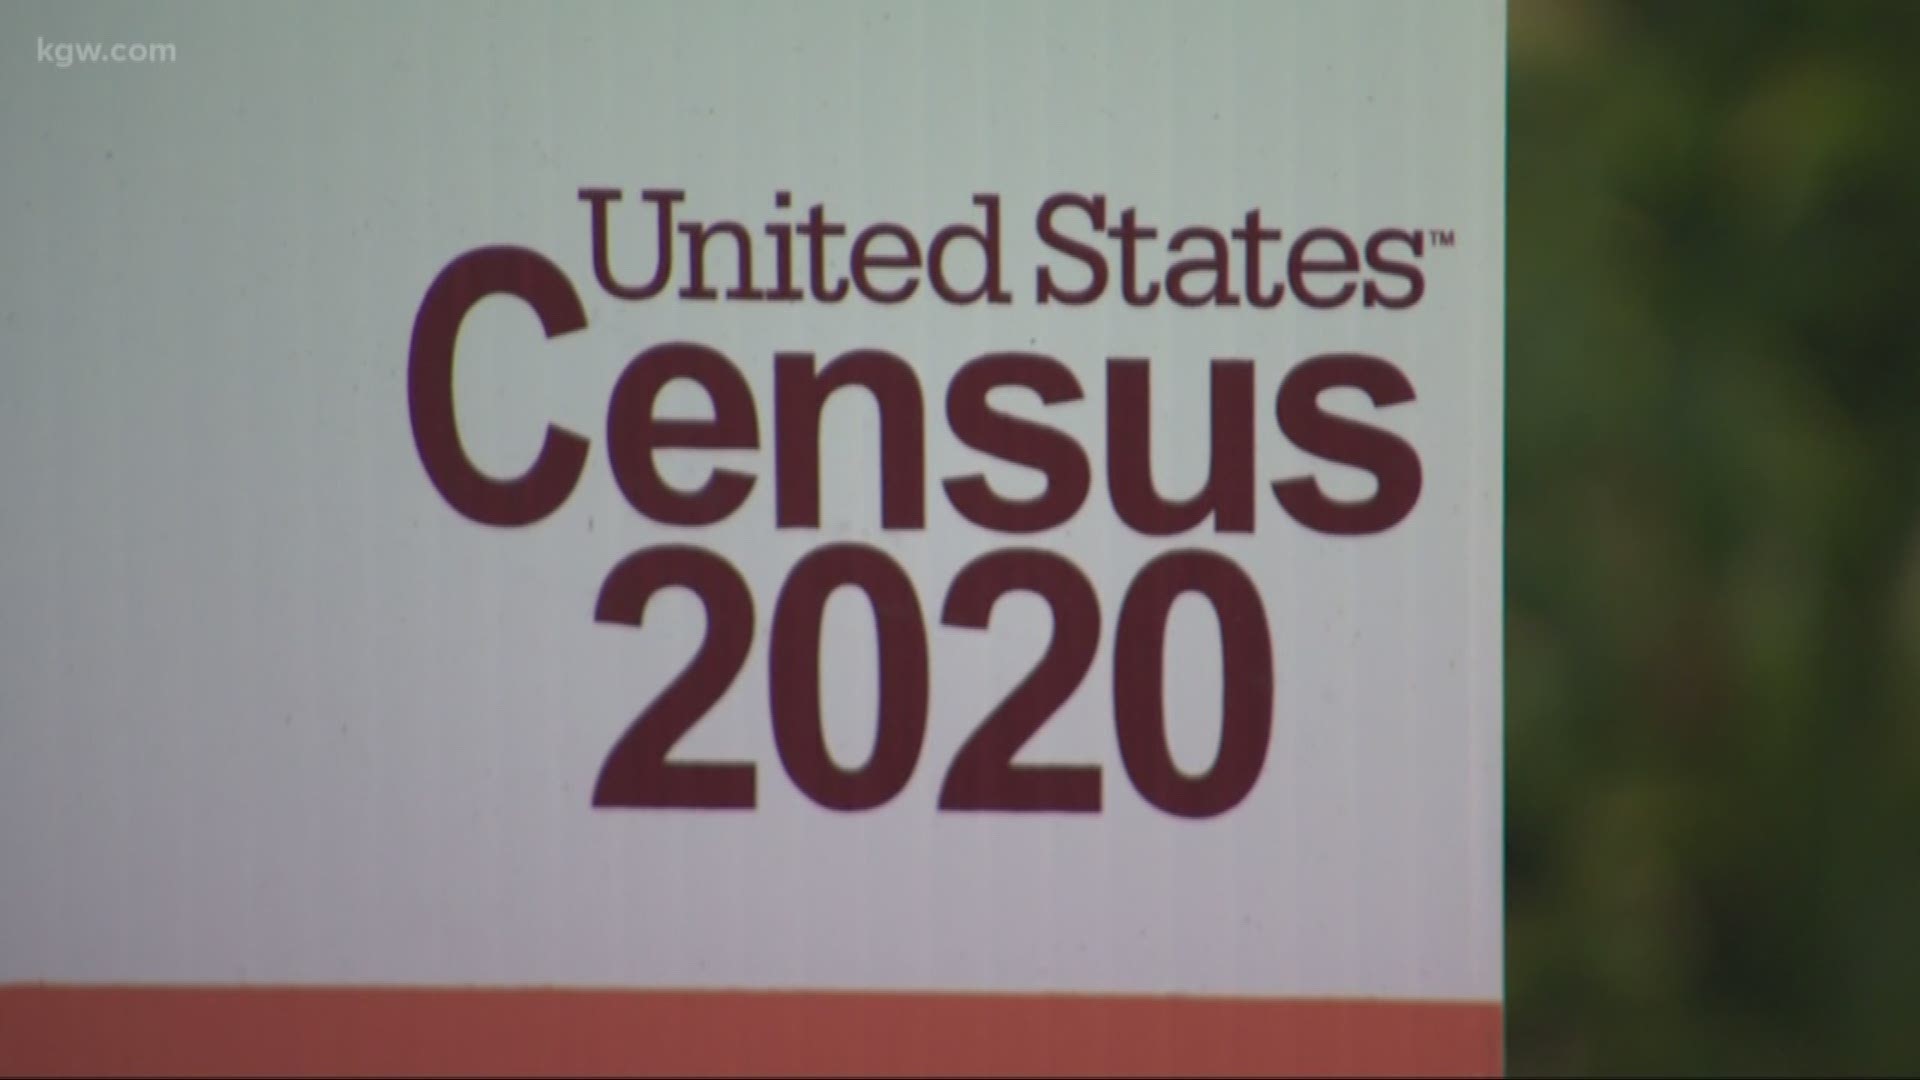 Starting mid-March you'll begin receiving official Census Bureau mail with directions on how to respond. You can respond online, over the phone or by mail.